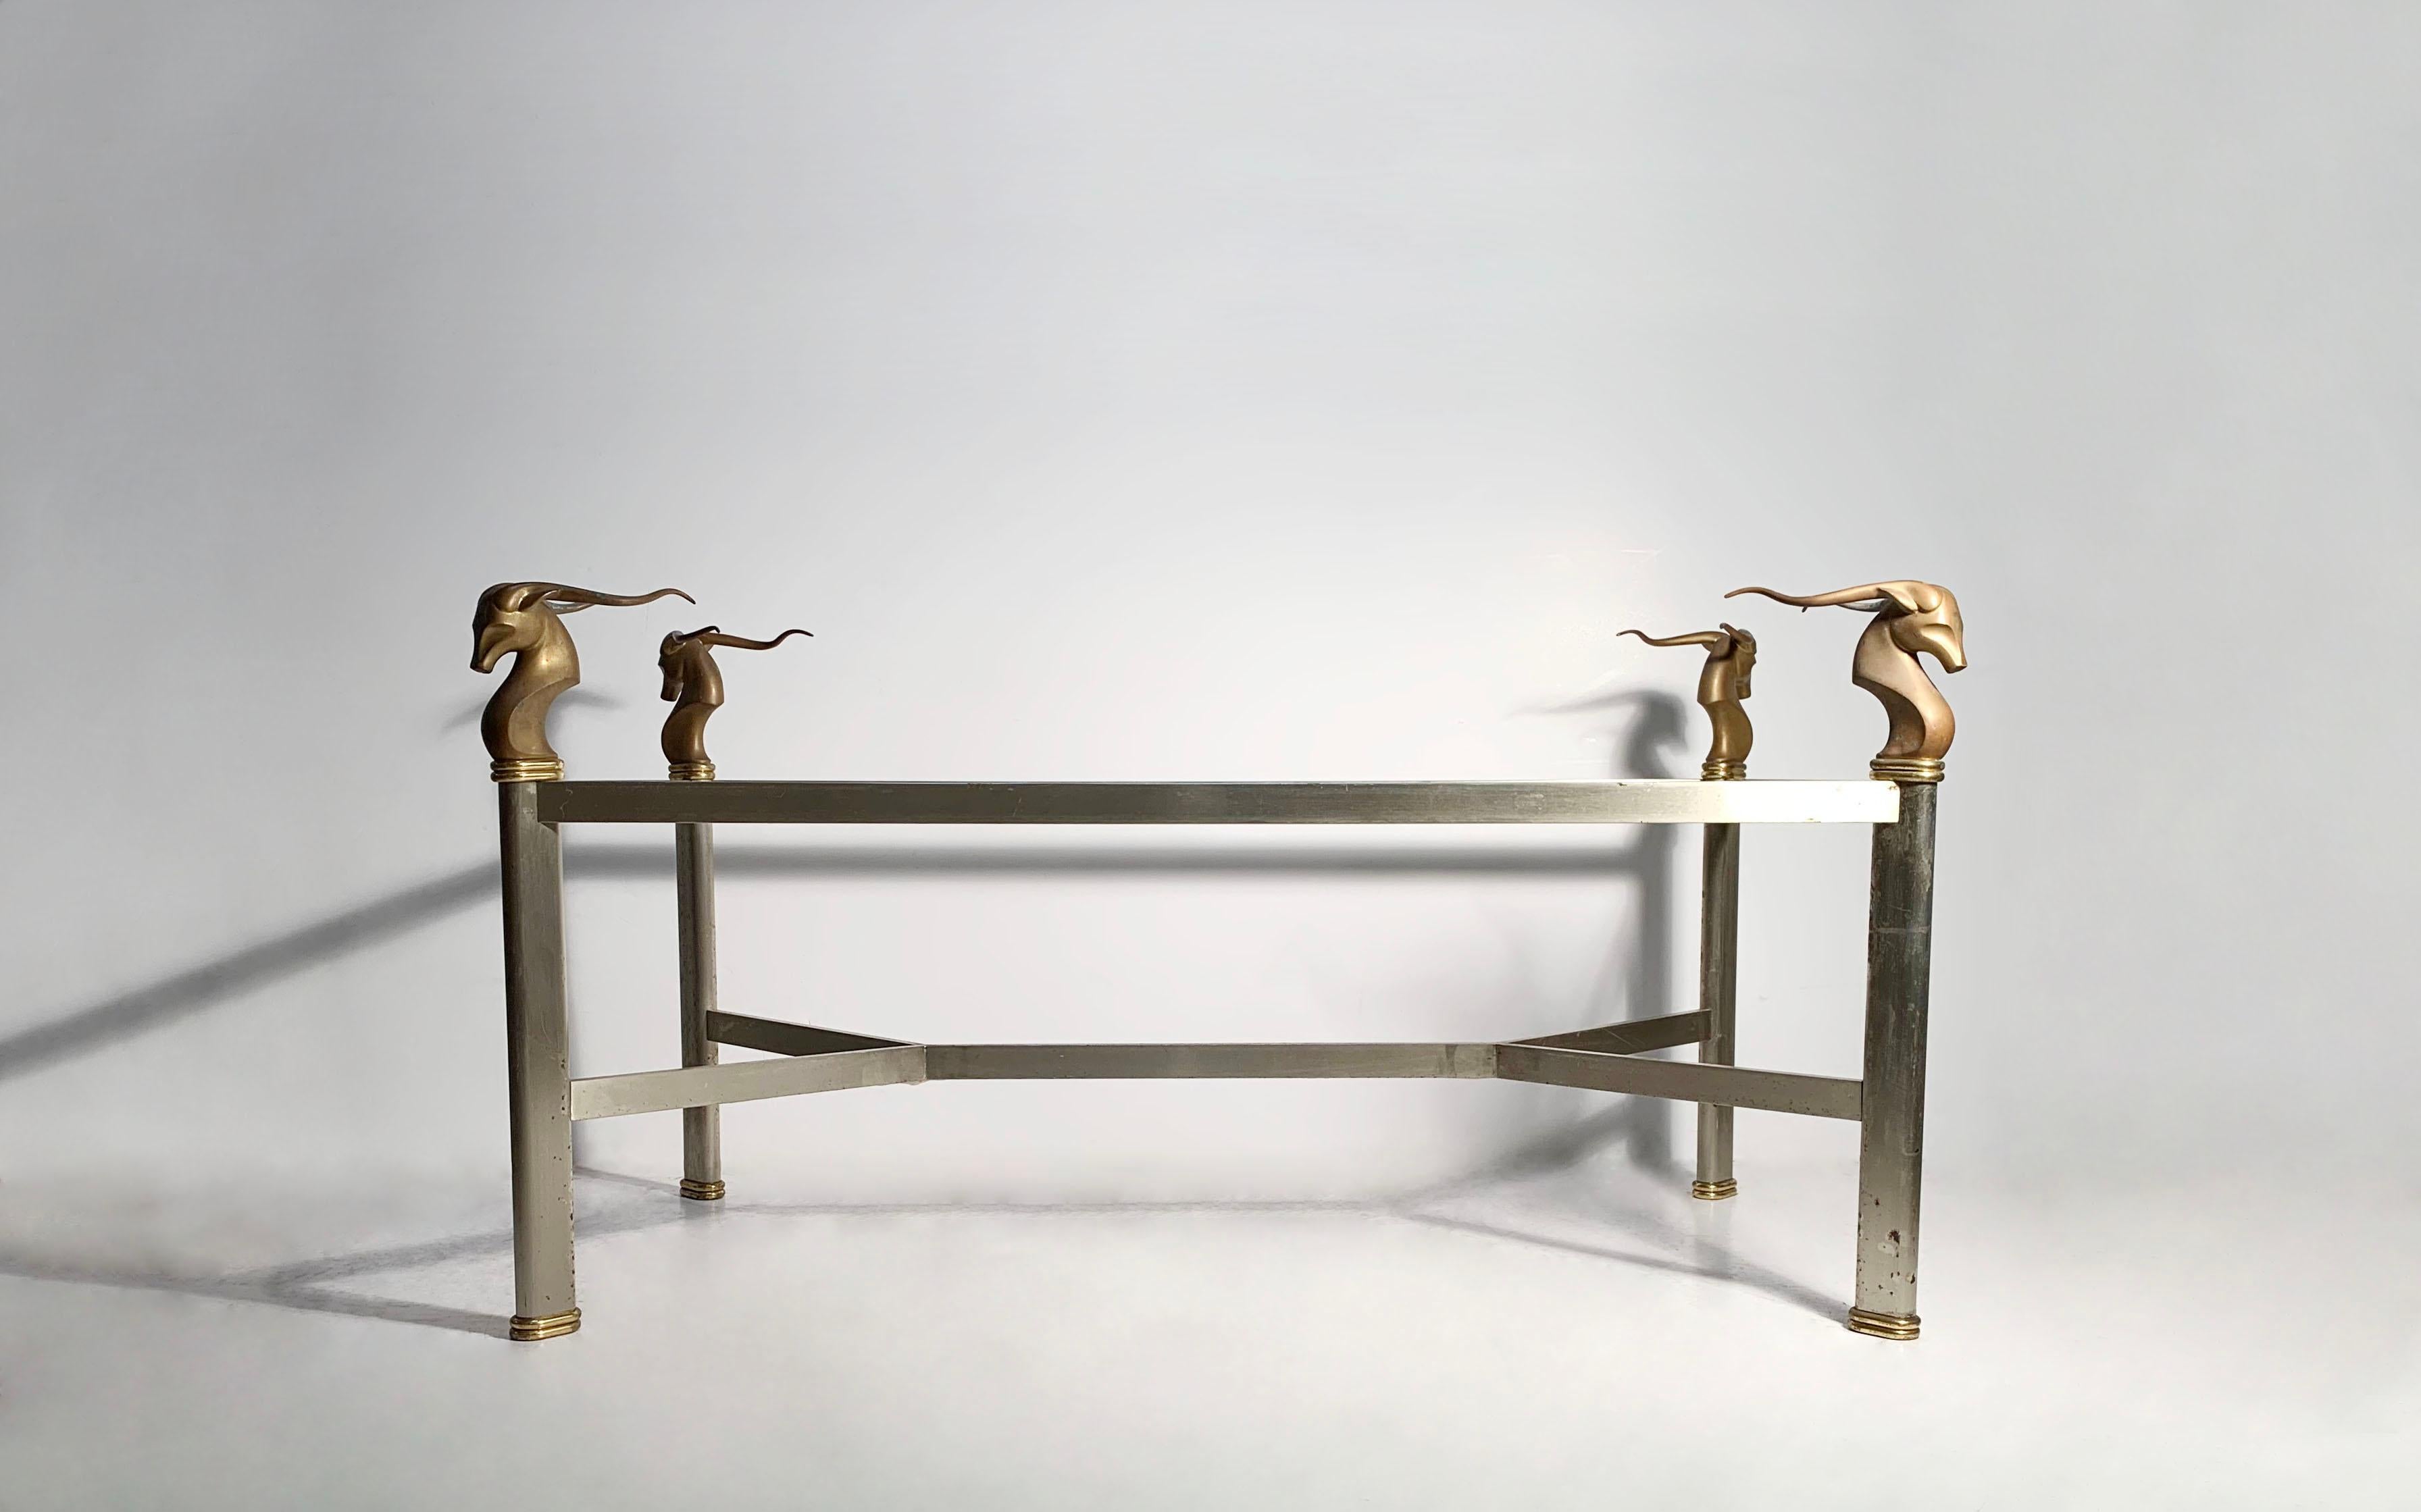 A Dramatic Table base seeing as either a Dining Table, Buffet Table, or Desk. Dating to the 1970s to possibly the 1980s.

Mounted at each corner are Solid Heavy Bronze Antelope heads which support a glass or top. Uncertain to the origin. Possibly